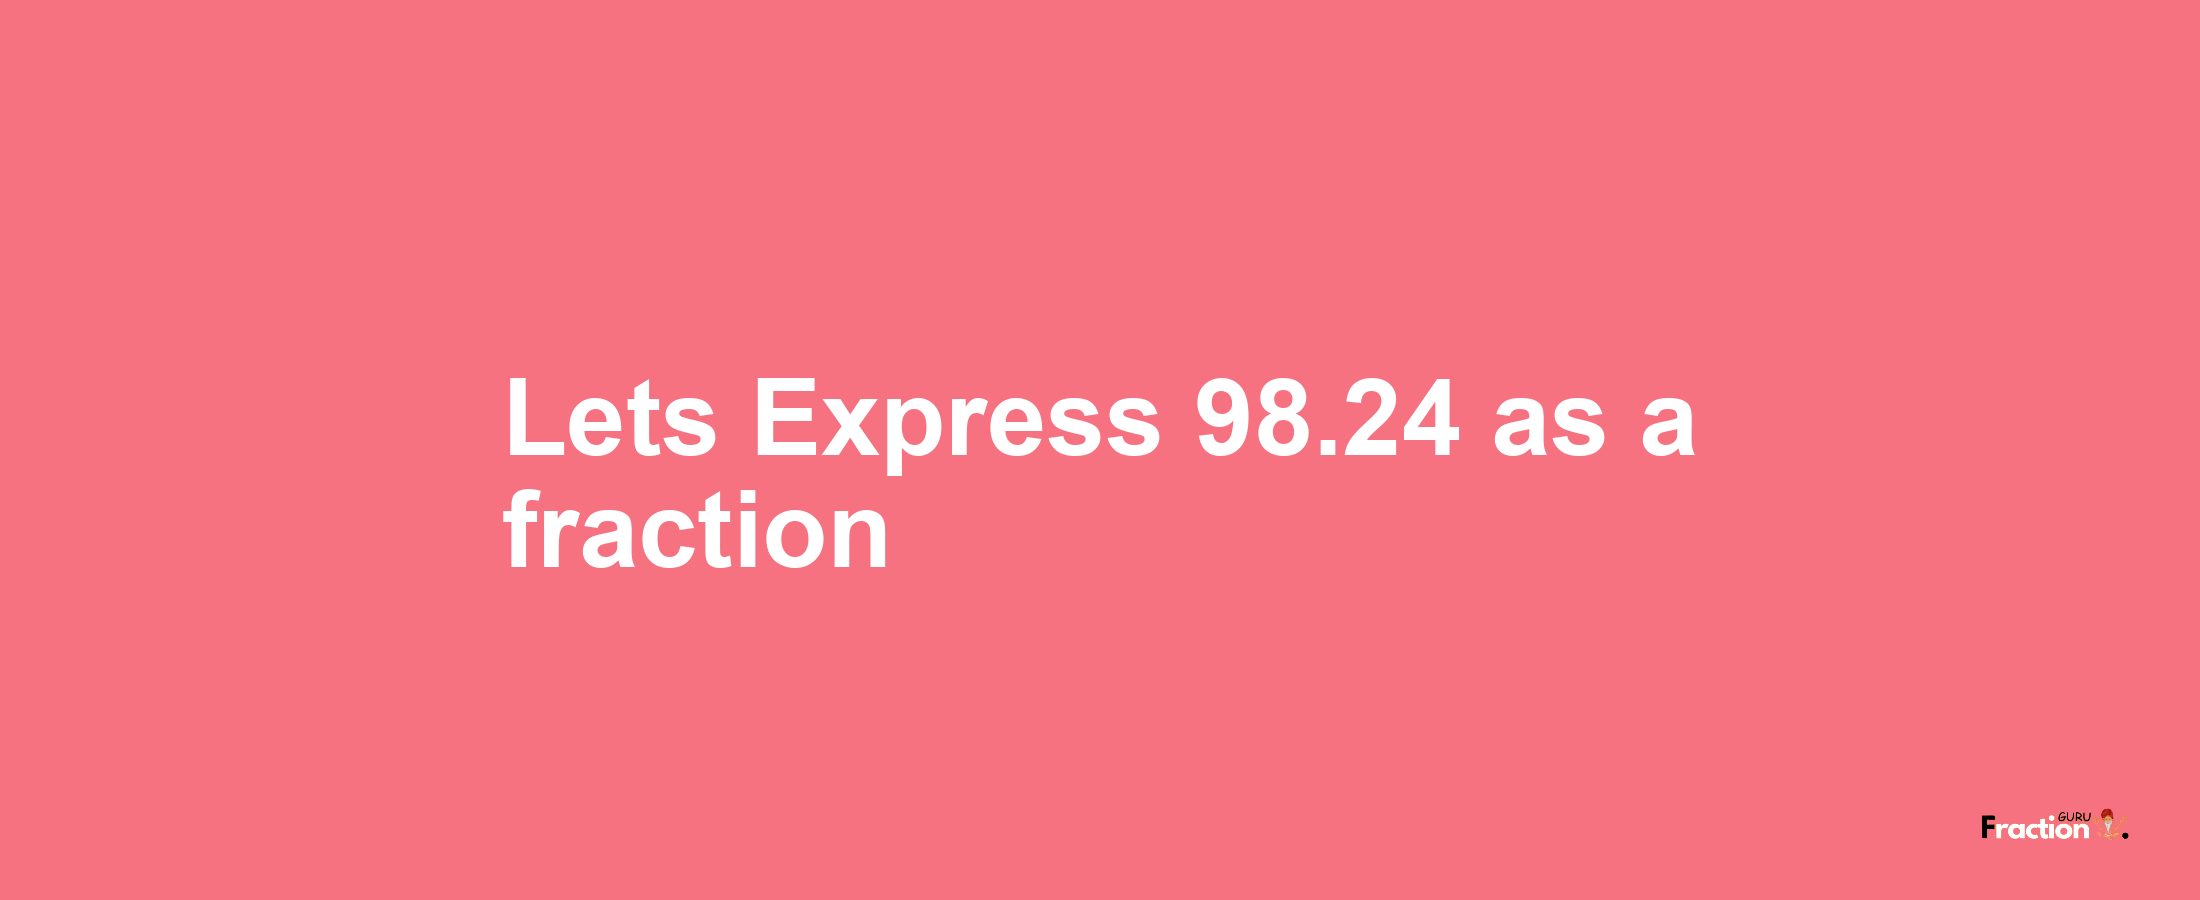 Lets Express 98.24 as afraction